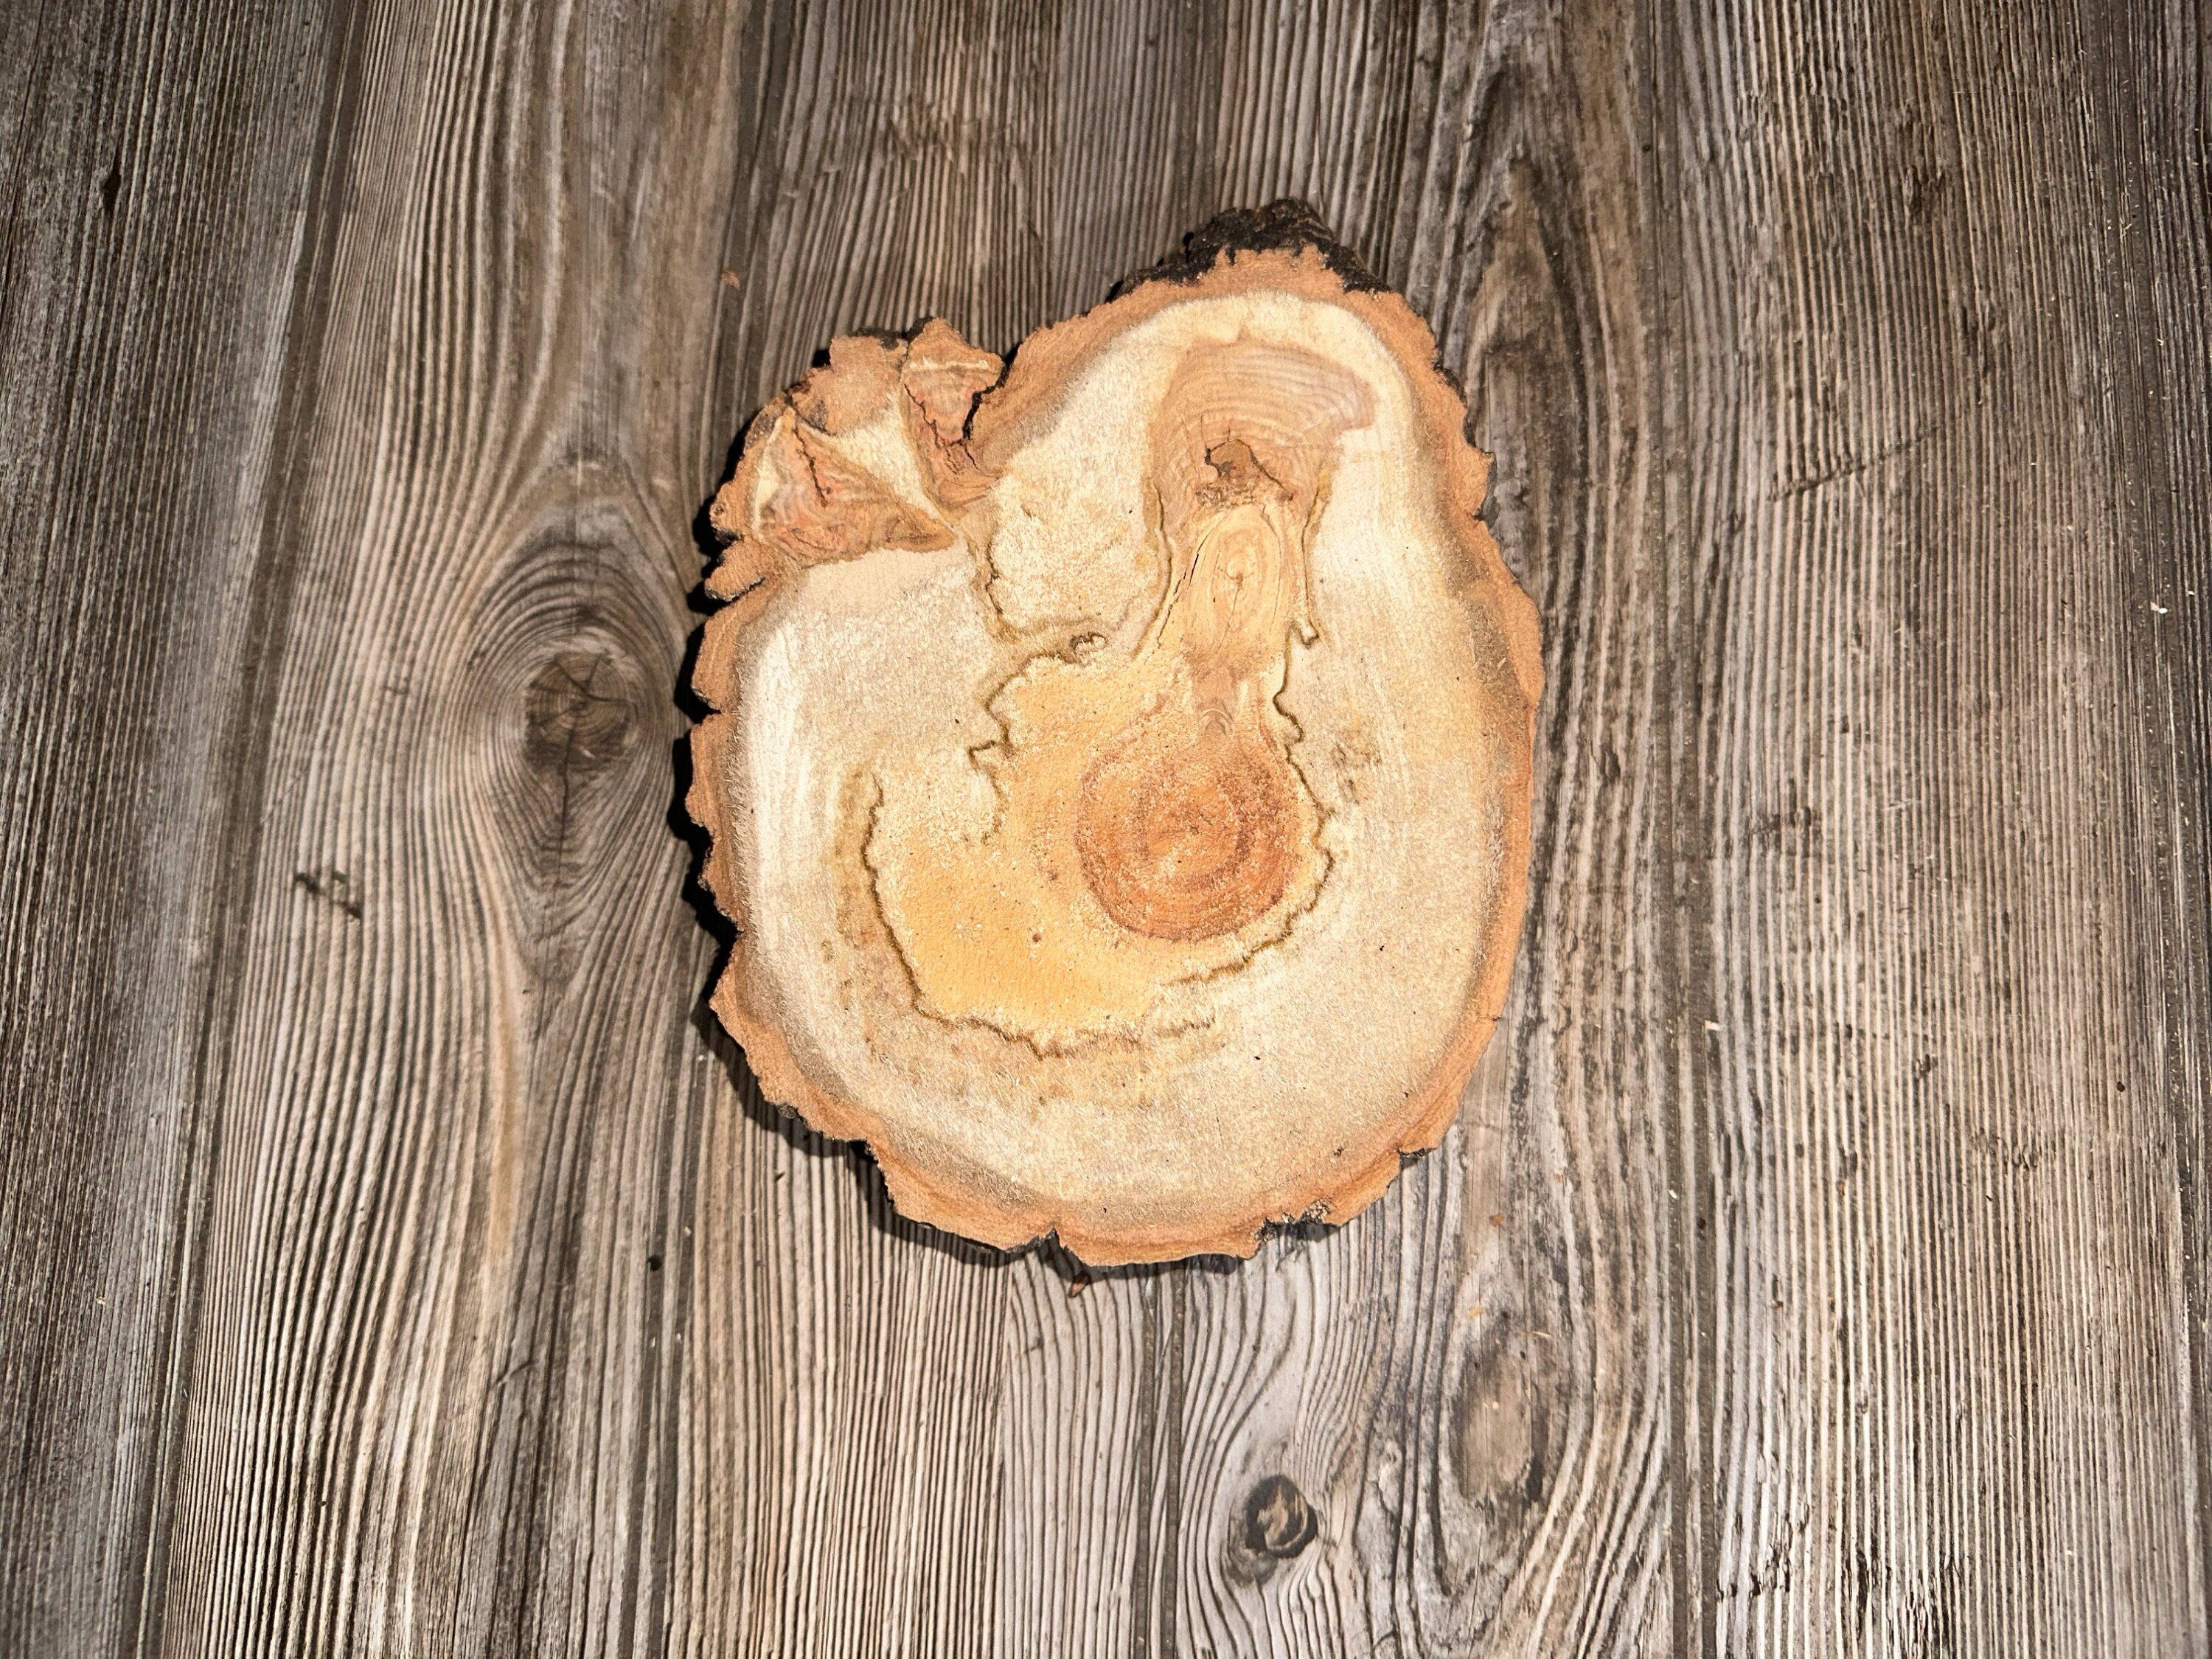 Aspen Burl Slice, Approximately 8.5 Inches Long by 6 Inches Wide and 2 Inches Thick